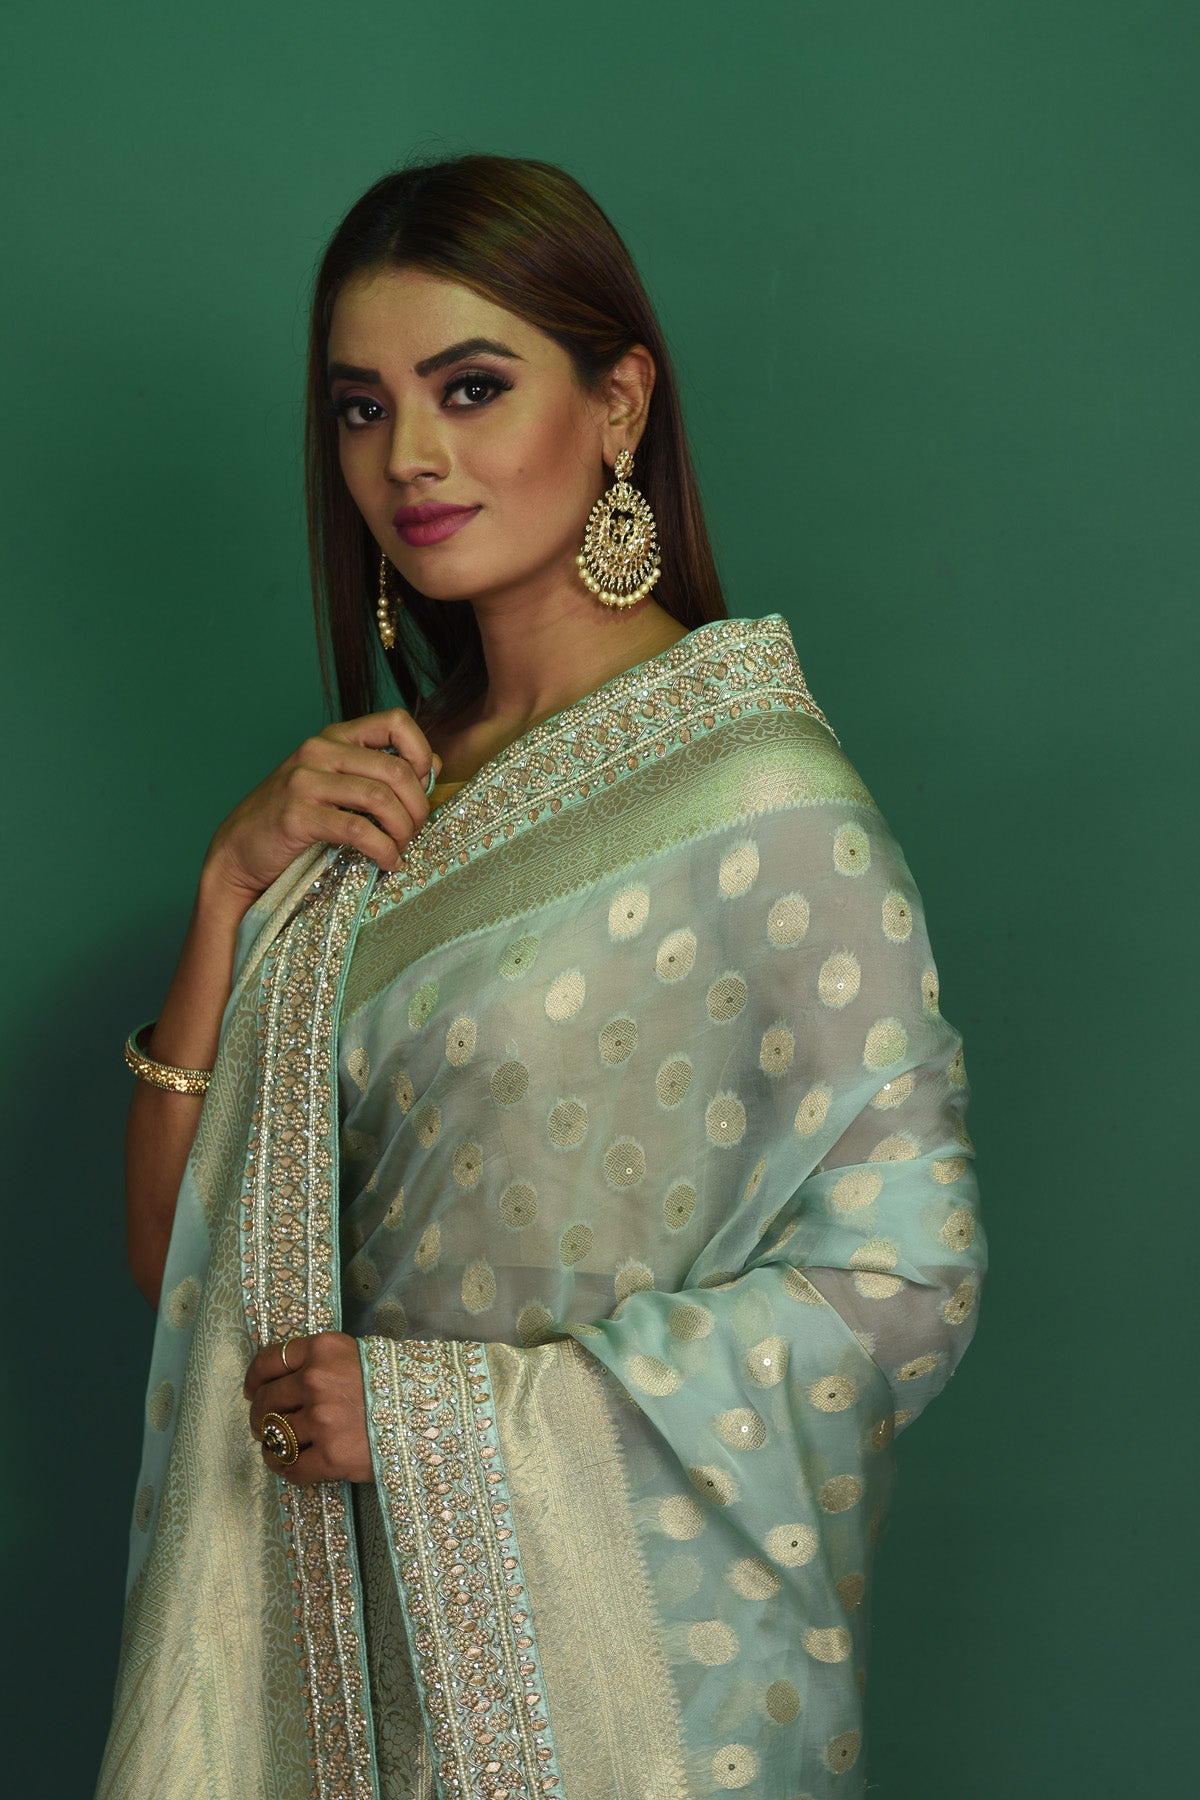 Buy stunning powder blue Benarasi georgette saree online in USA with embroidered border. Be a vision of style and elegance at parties and special occasions in beautiful designer sarees, embroidered sarees, printed sarees, satin saris from Pure Elegance Indian fashion store in USA.-closeup